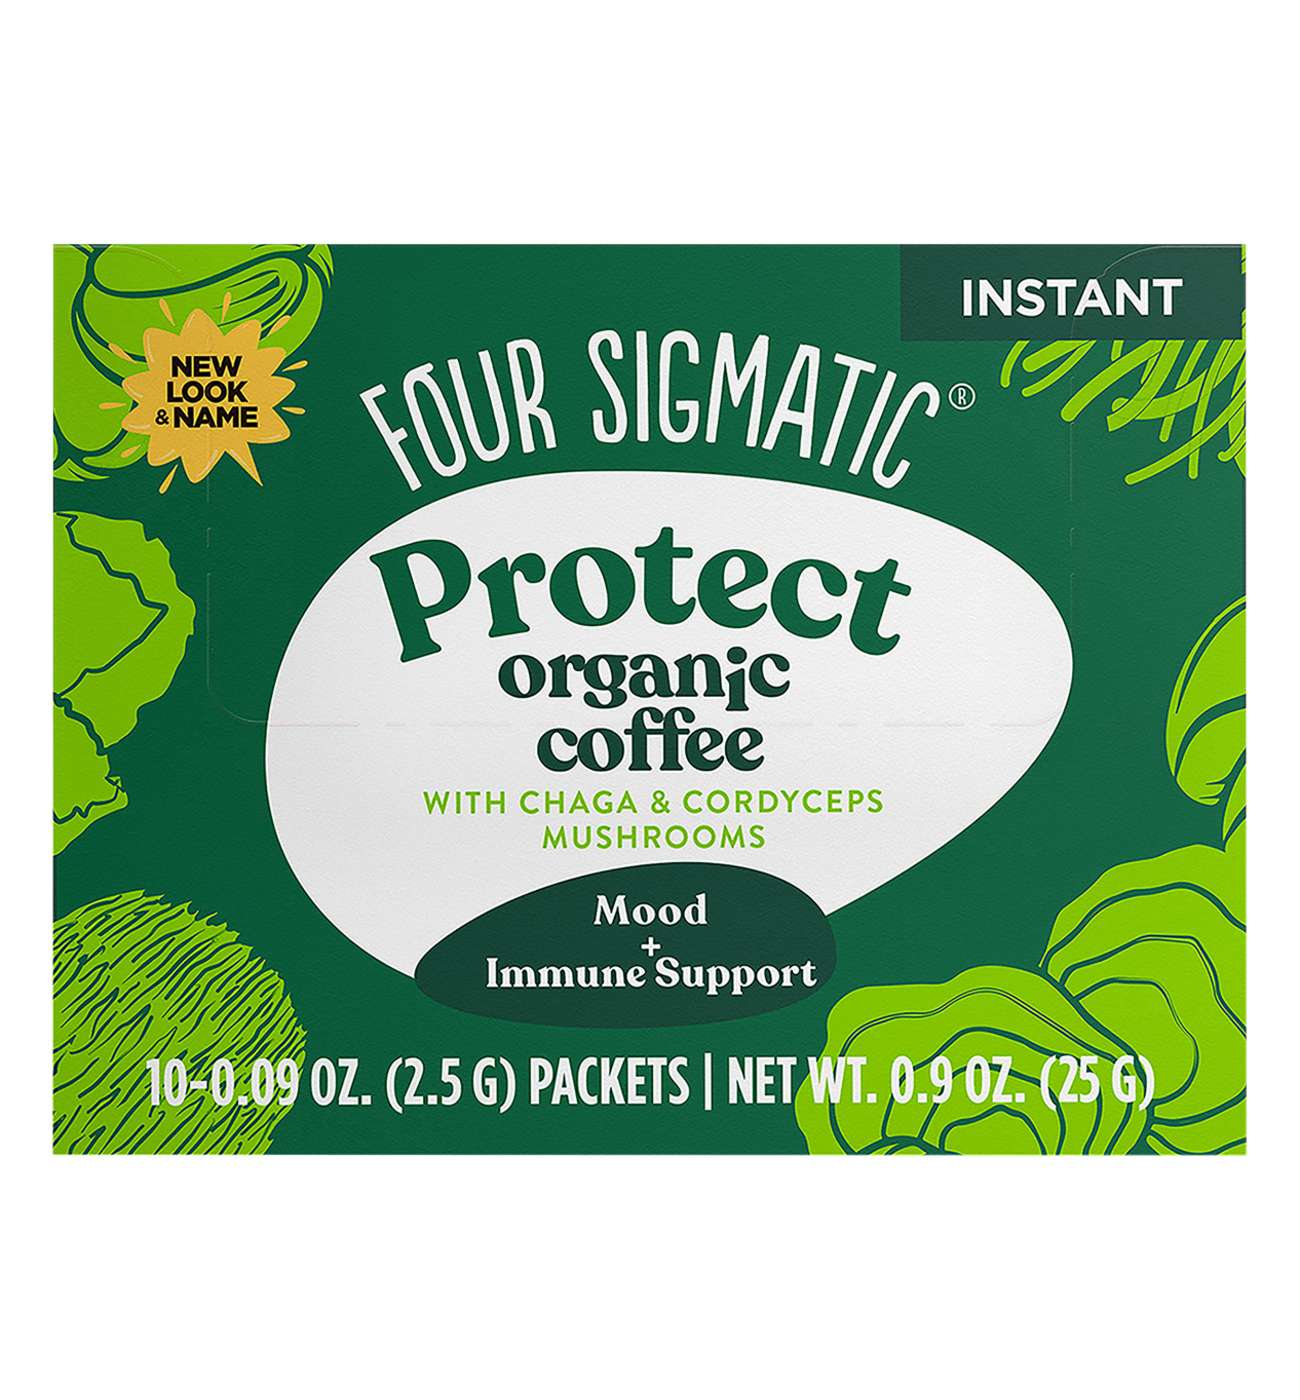 Four Sigmatic Protect Organic Coffee Mix Packets; image 1 of 2